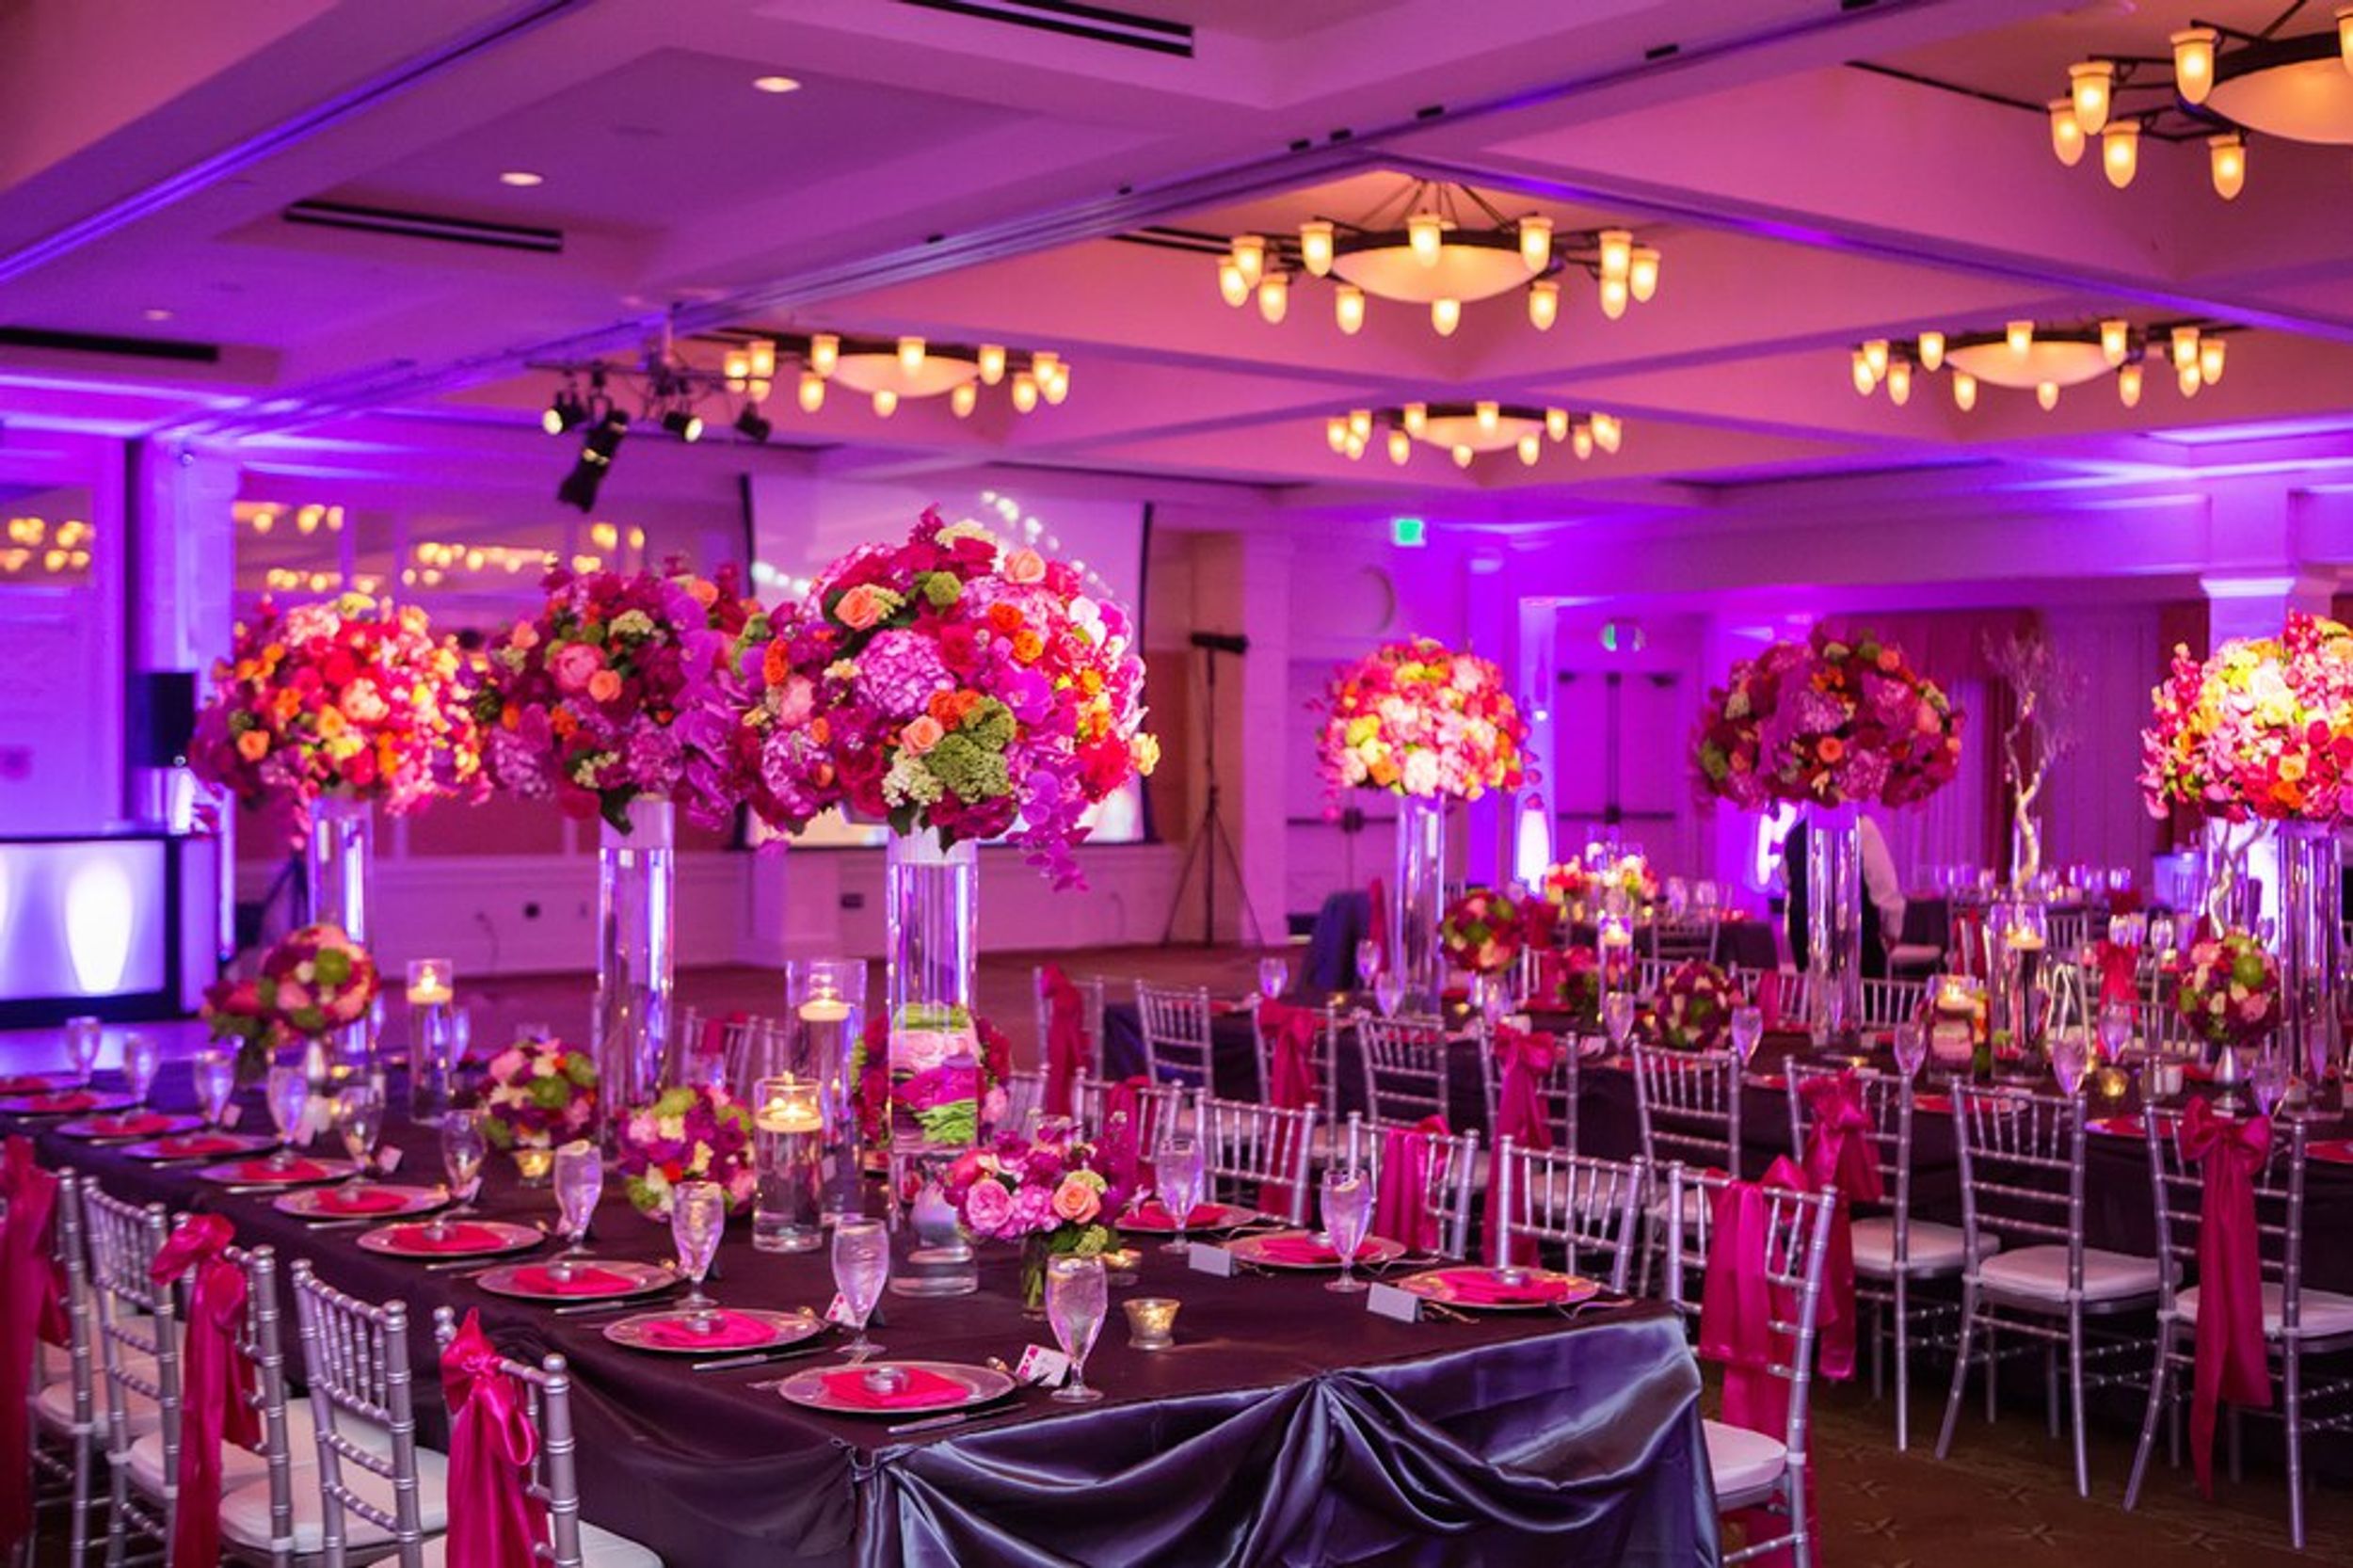 Why I Want To Be An Event Planner After I Graduate